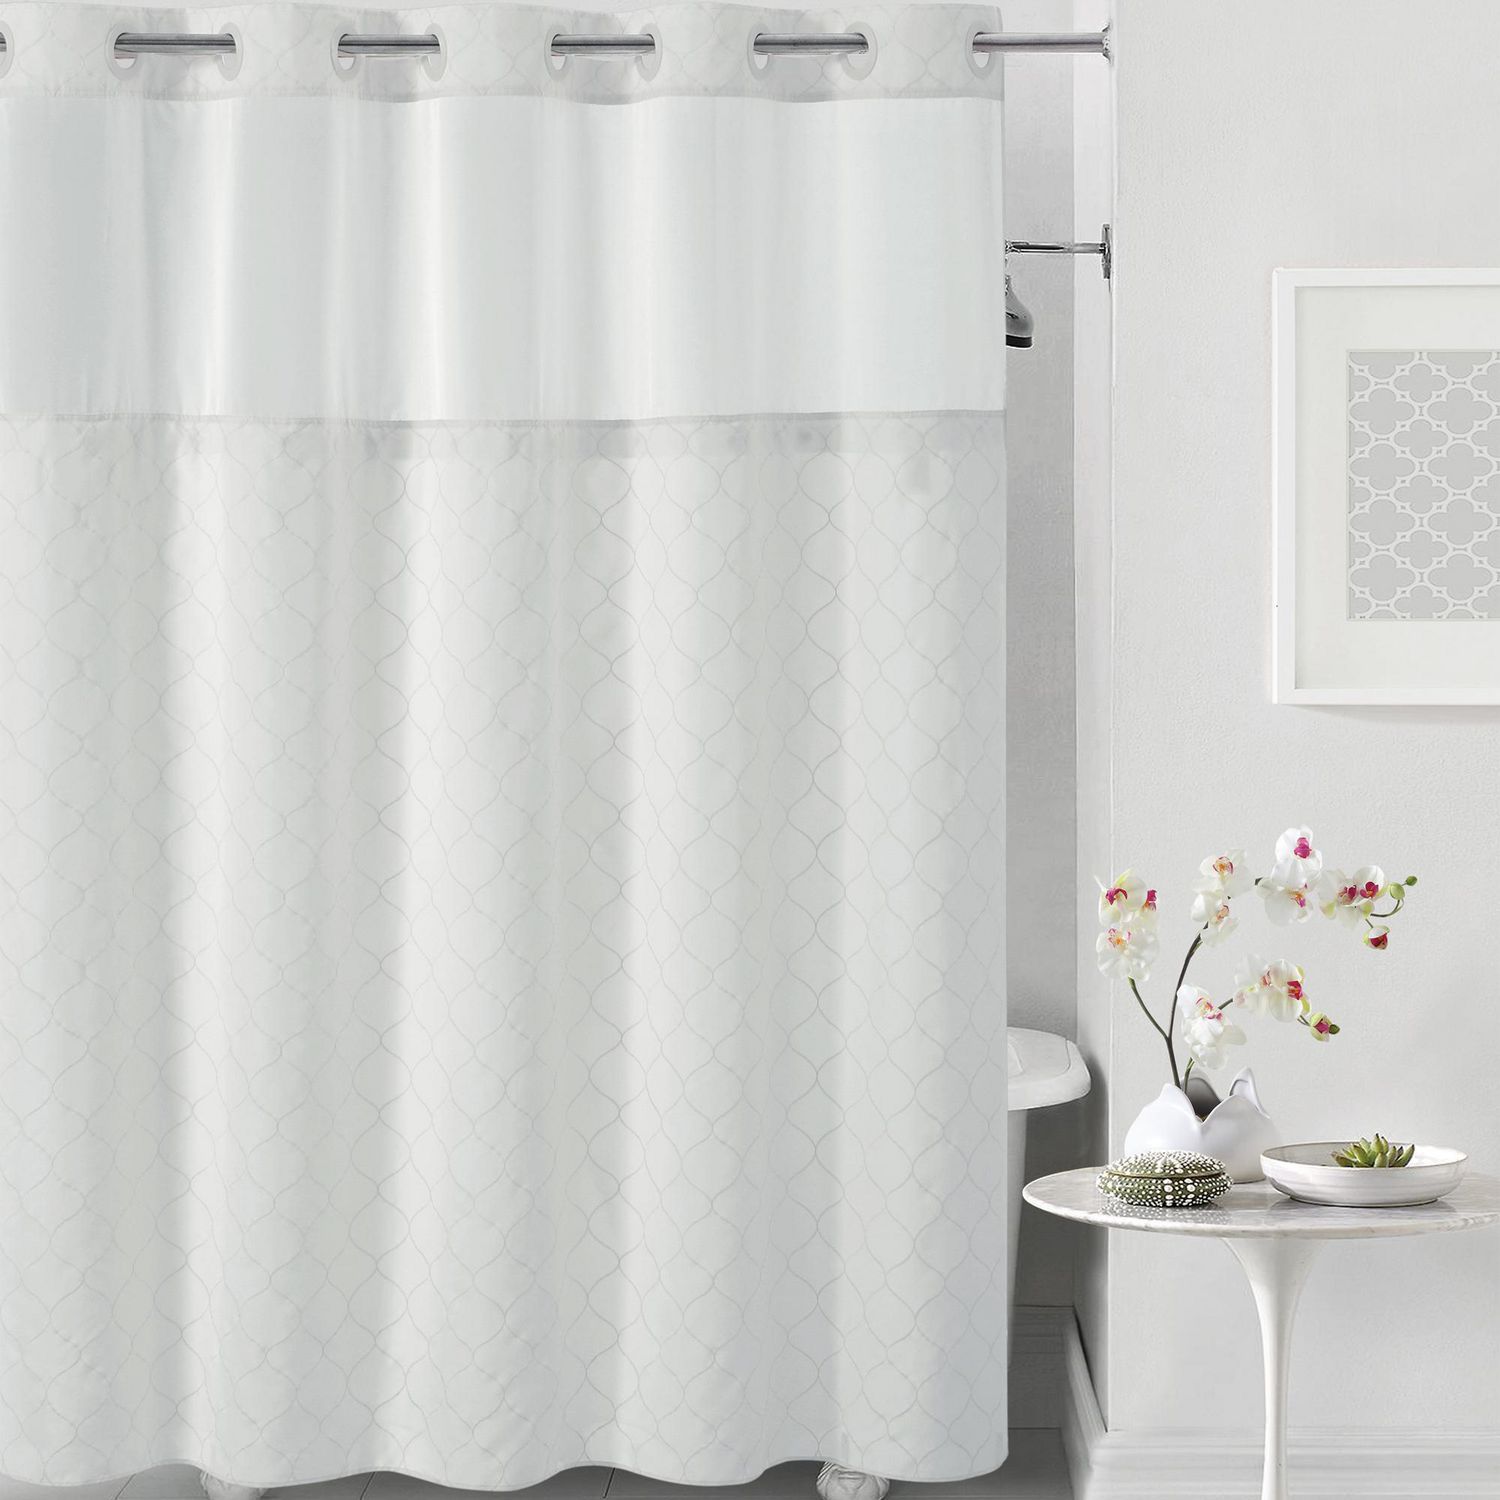 shower curtain rods home